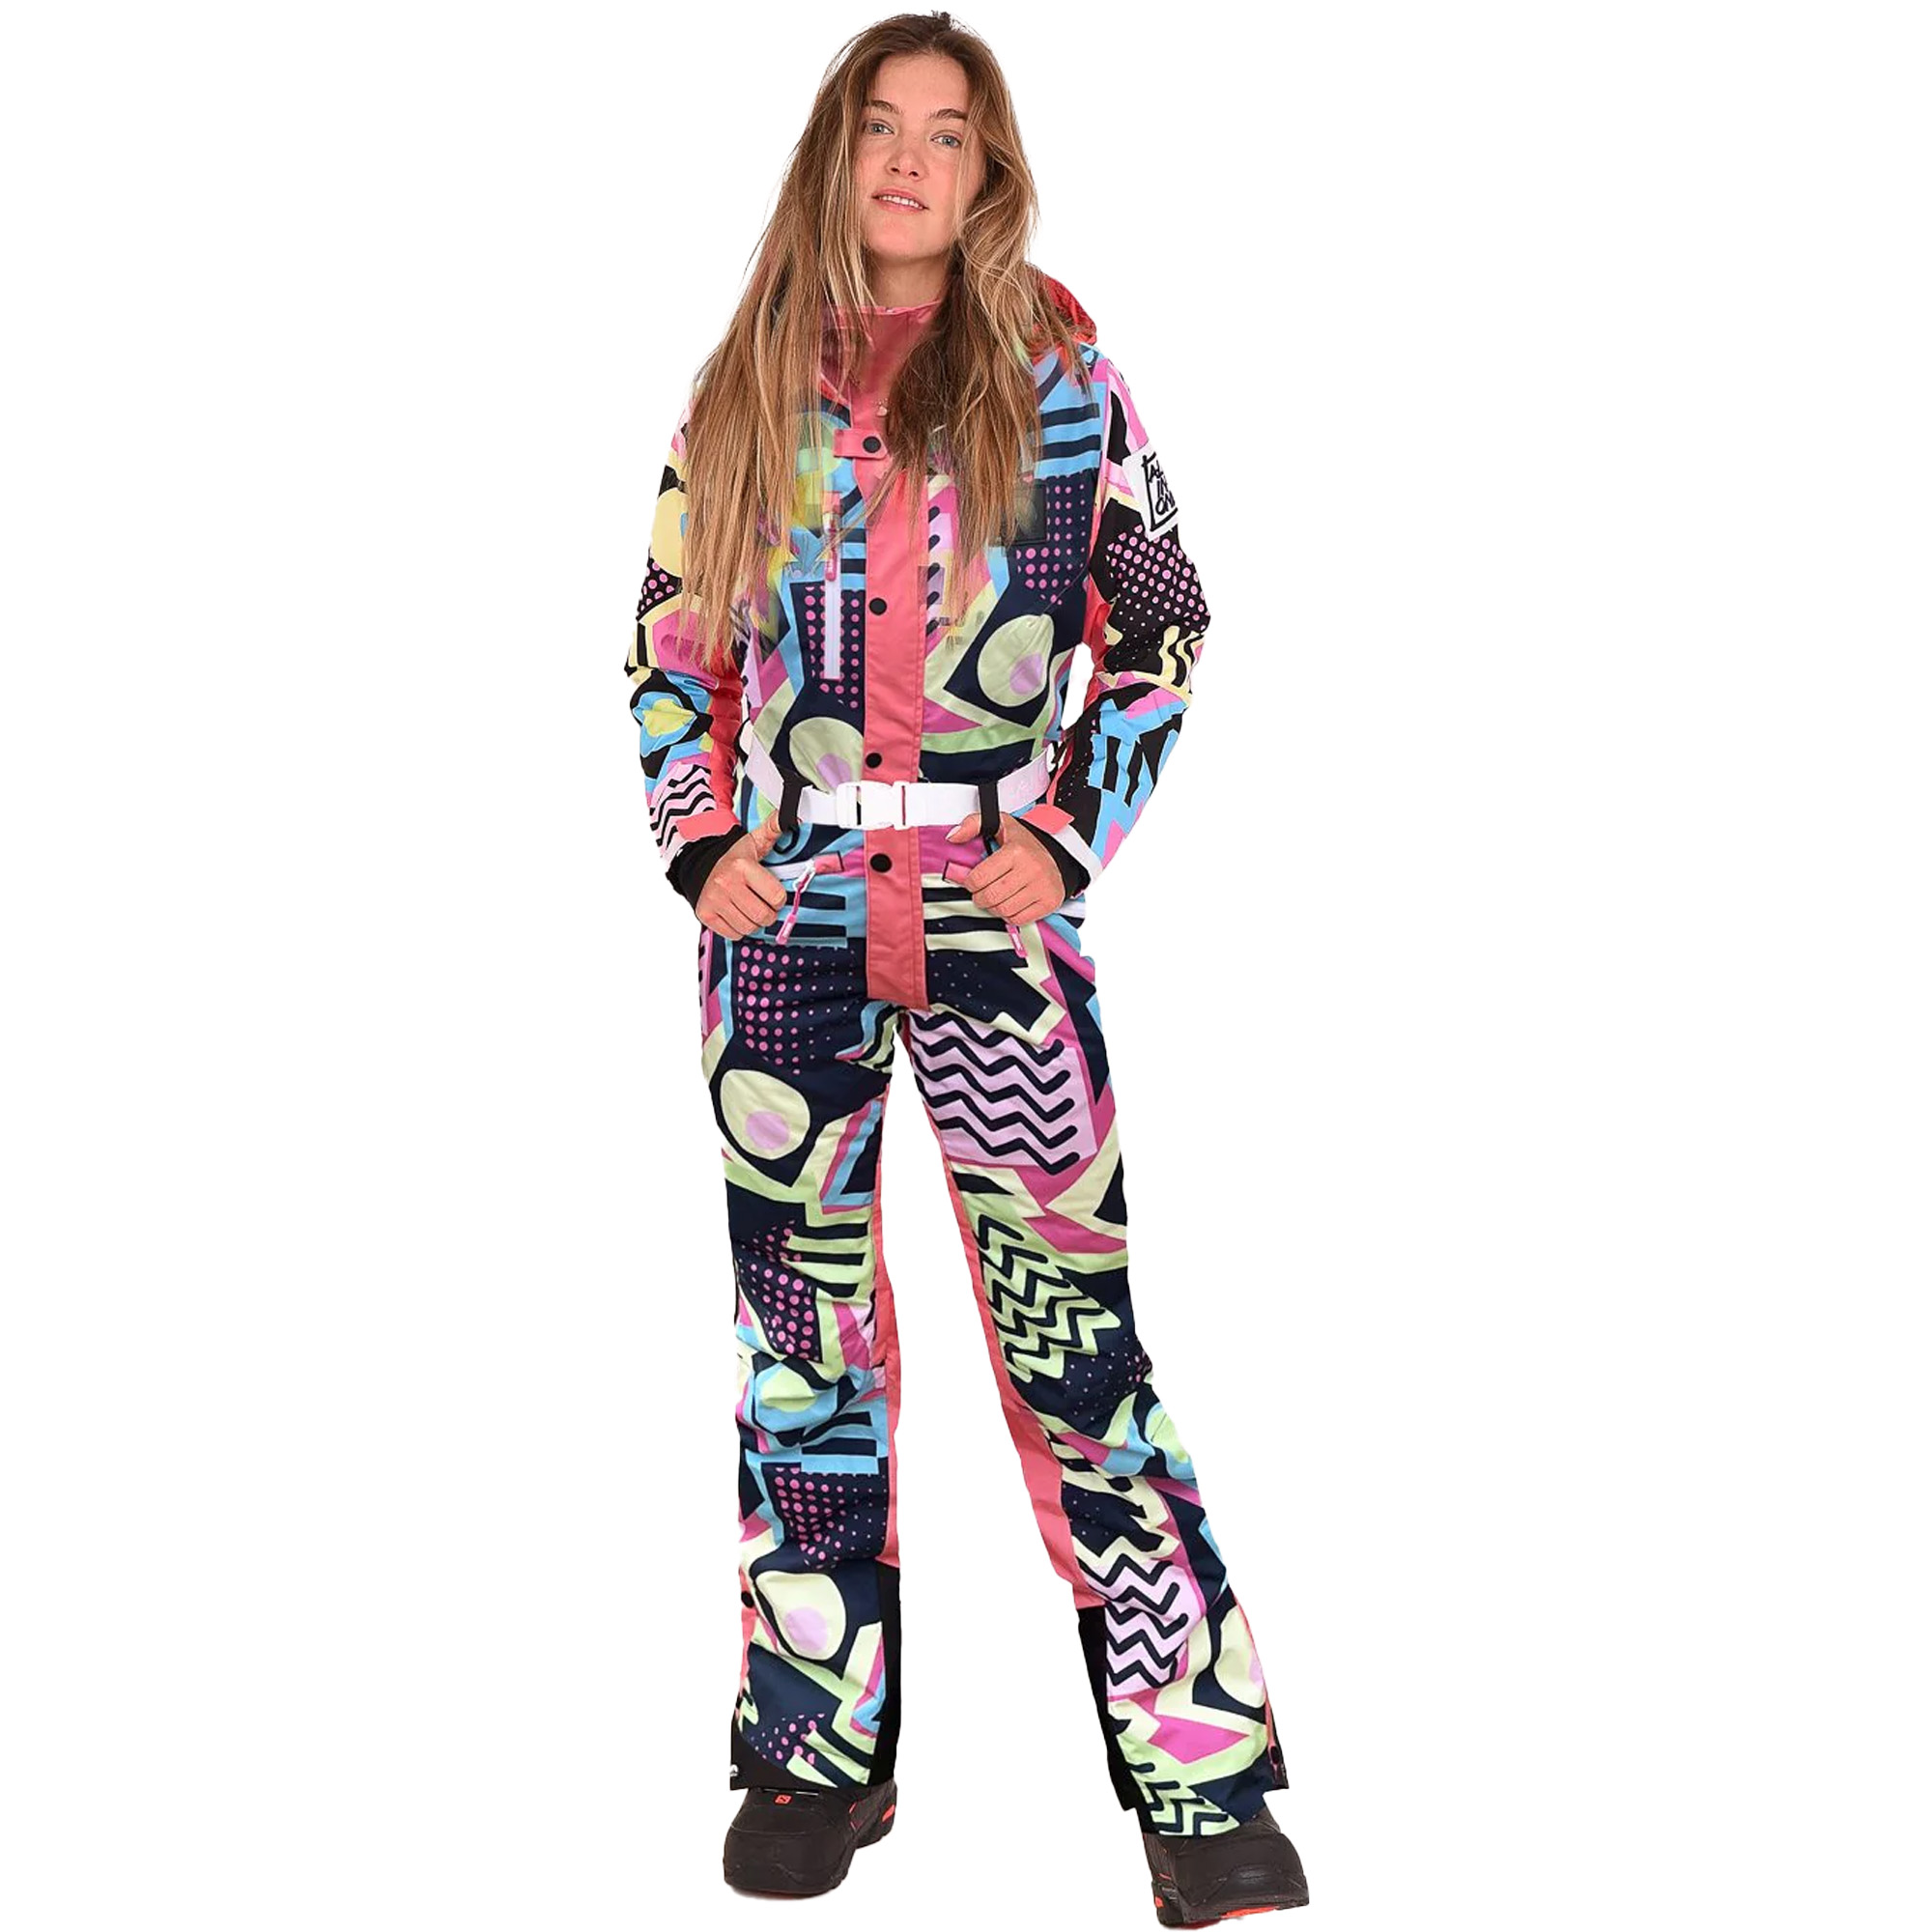 OOSC Saved By The Bell Women's One Piece Ski Suit